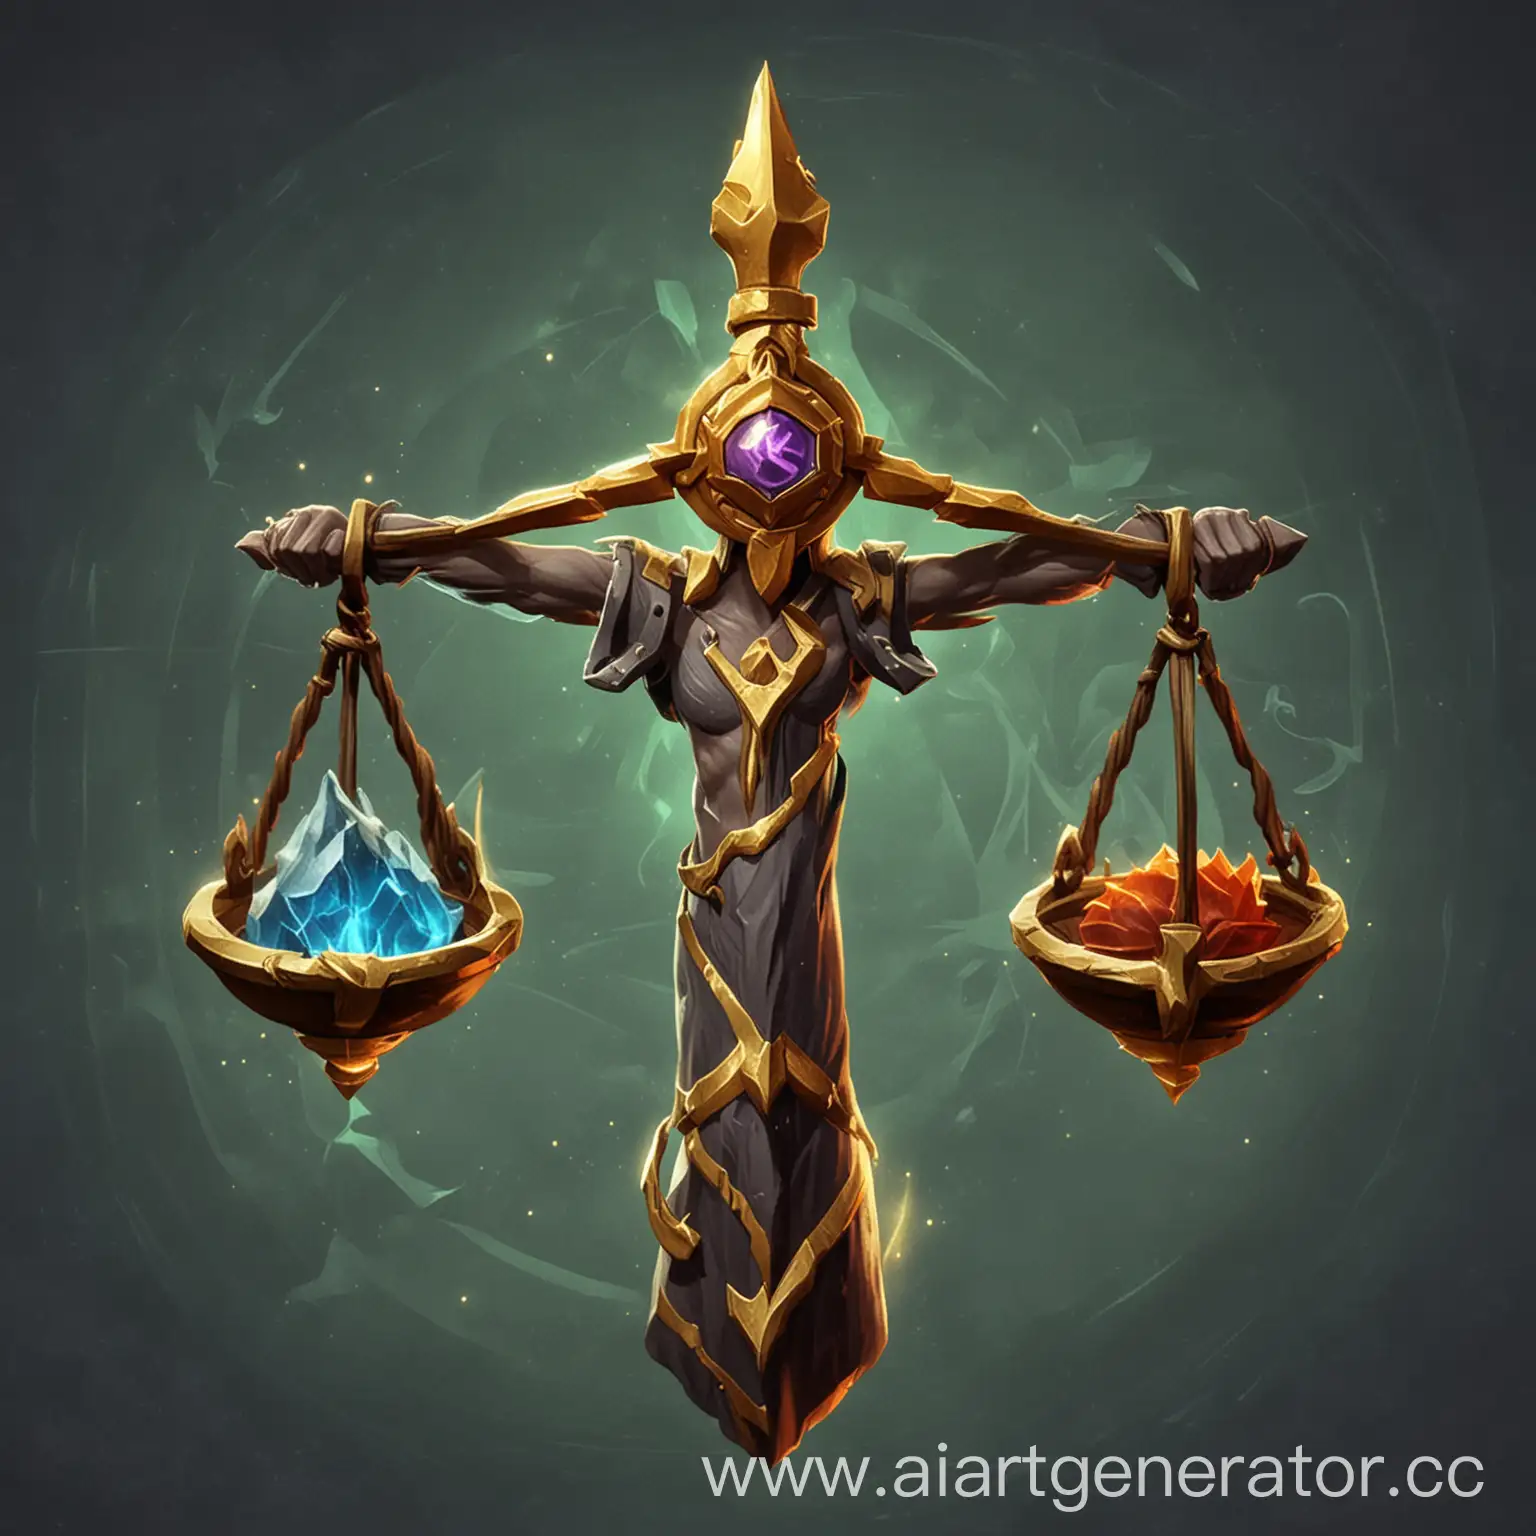 Balanced-Scales-Ability-Icon-in-Dota-2-Detailed-Depiction